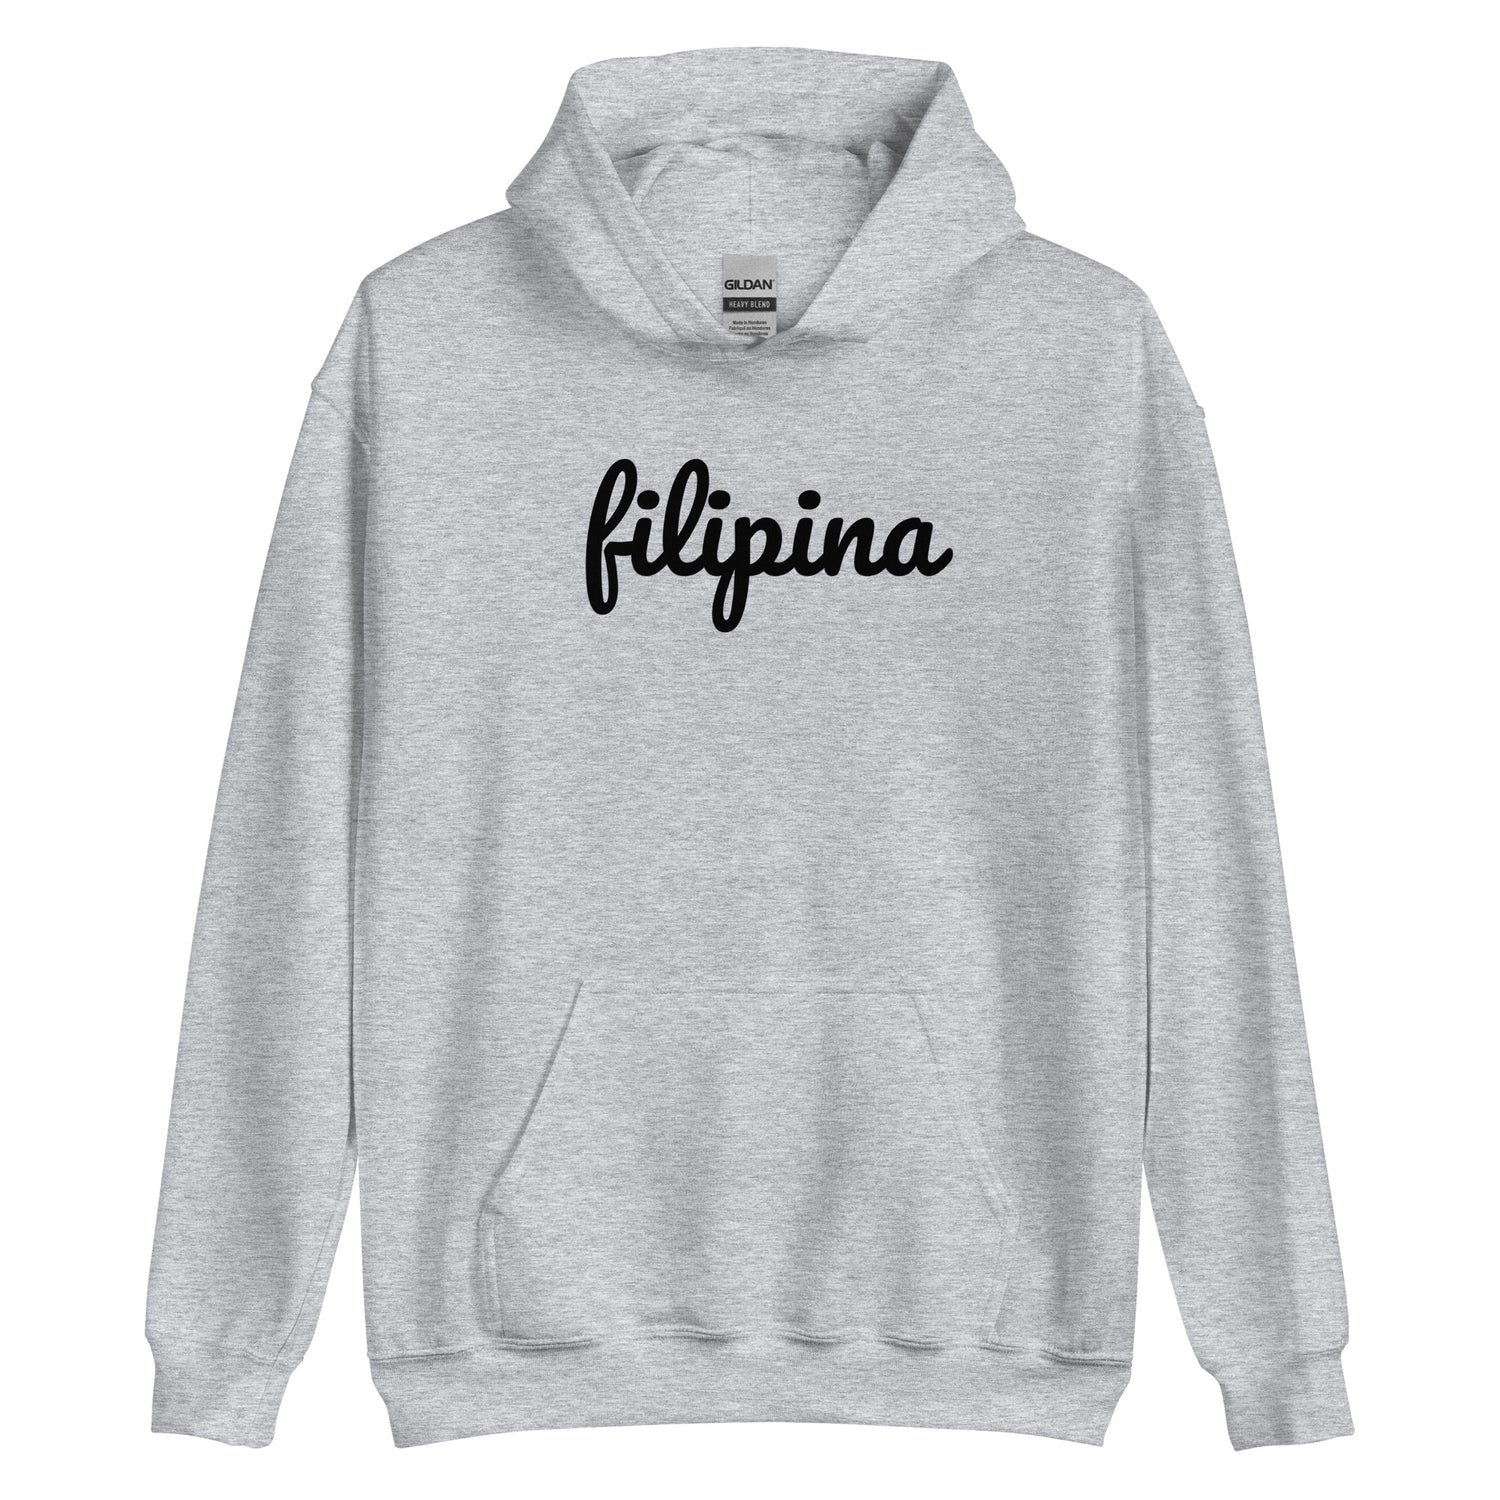 Filipina Statement Hoodie in color variant Sport Gray.